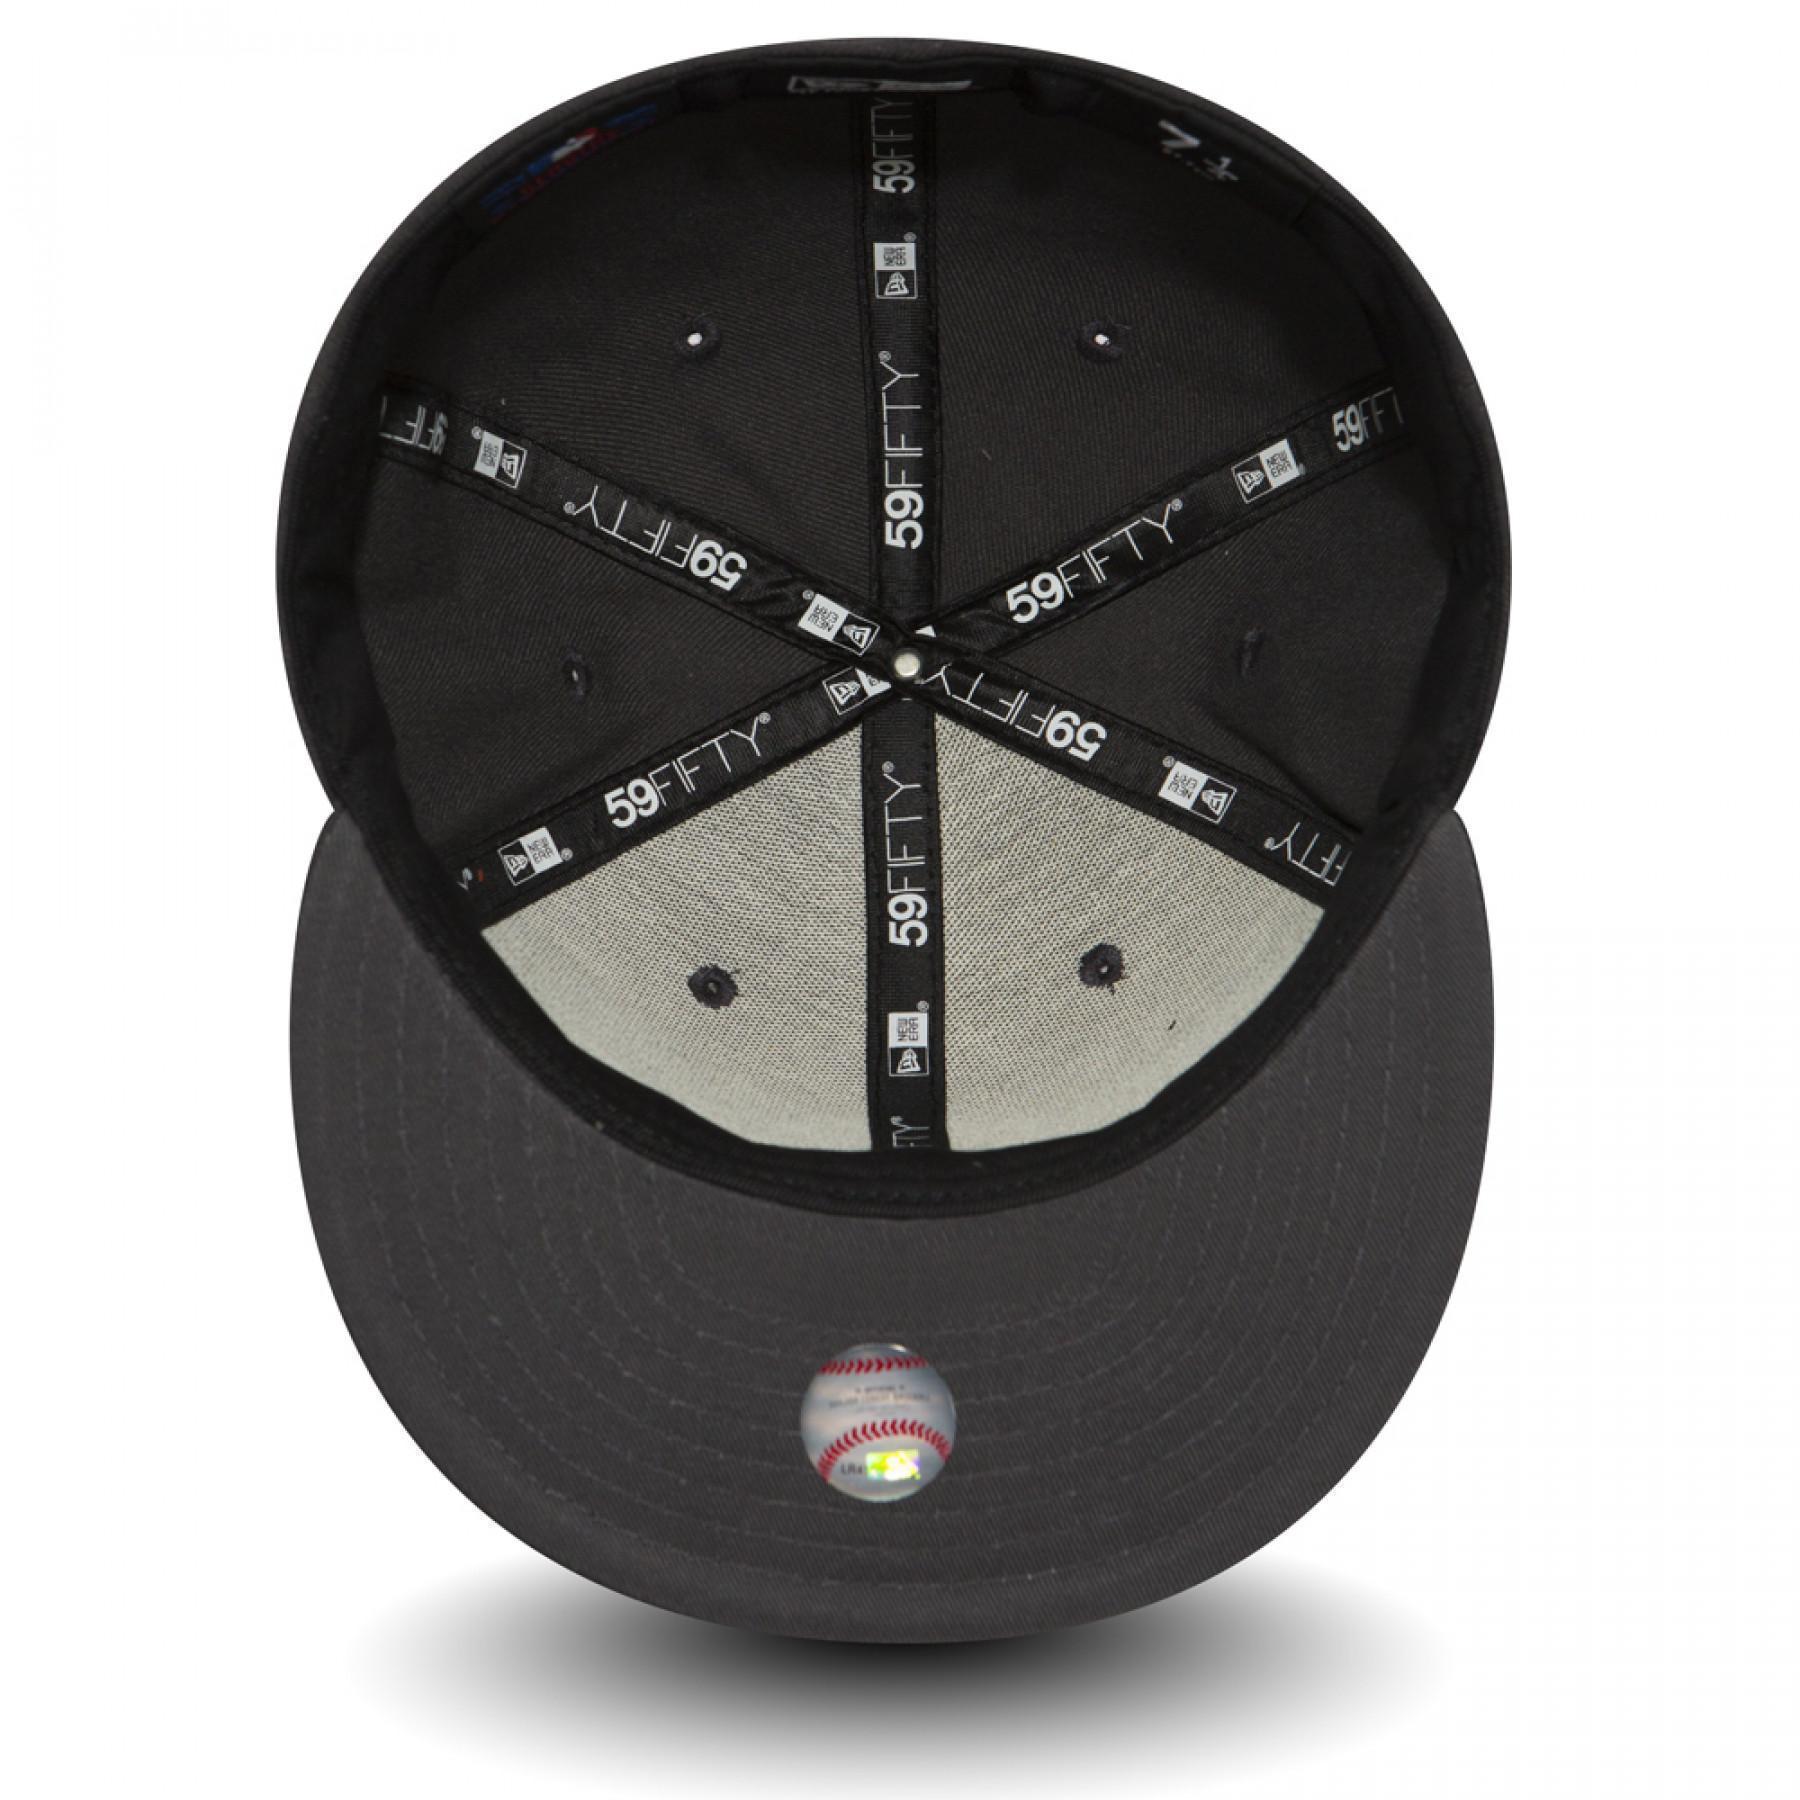 Casquette New Era essential 59fifty New York Yankees